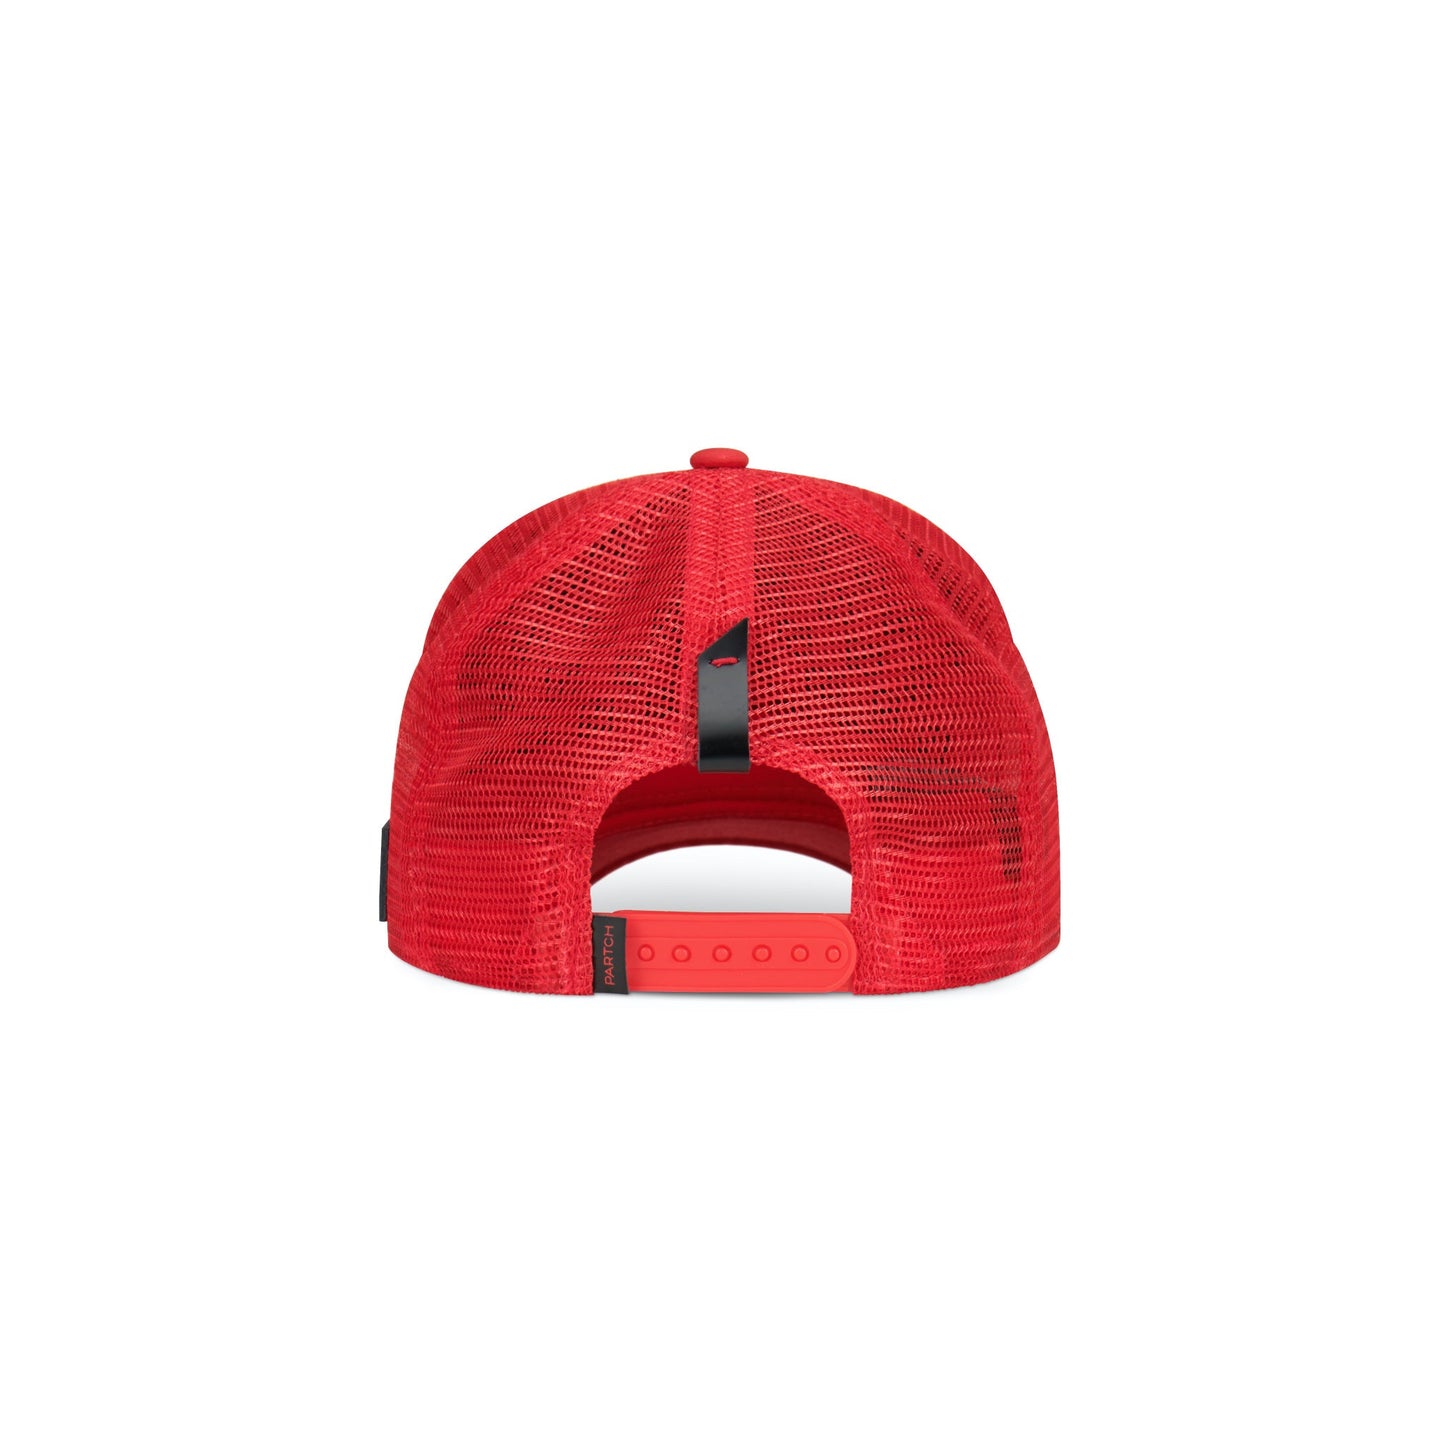 Partch Trucker Hat Red with PARTCH-Clip Inspyr Back View